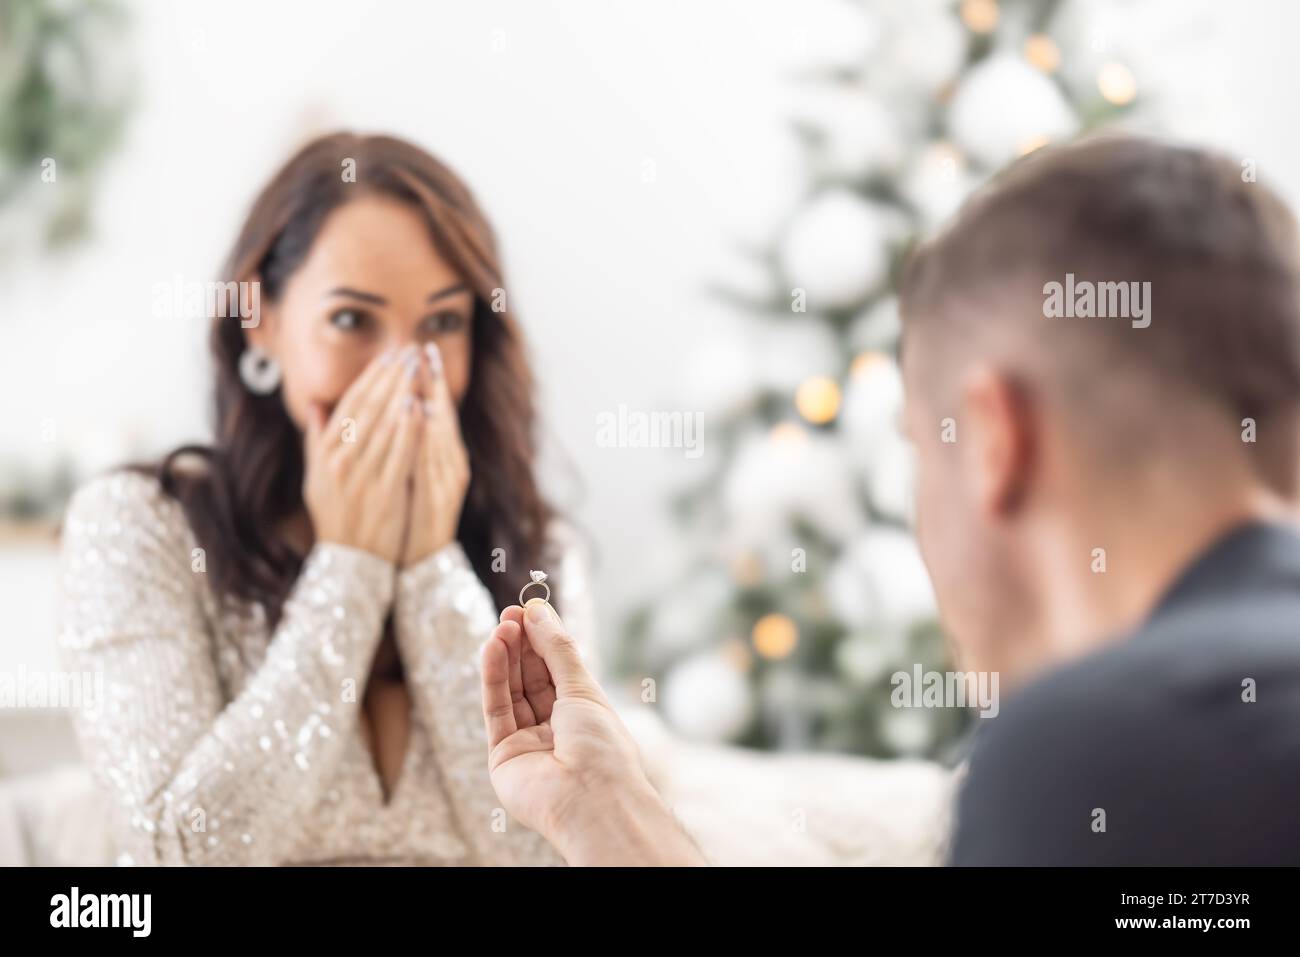 Christmas proposal by a man holding a ring in front of his surprised girlfriend. Stock Photo